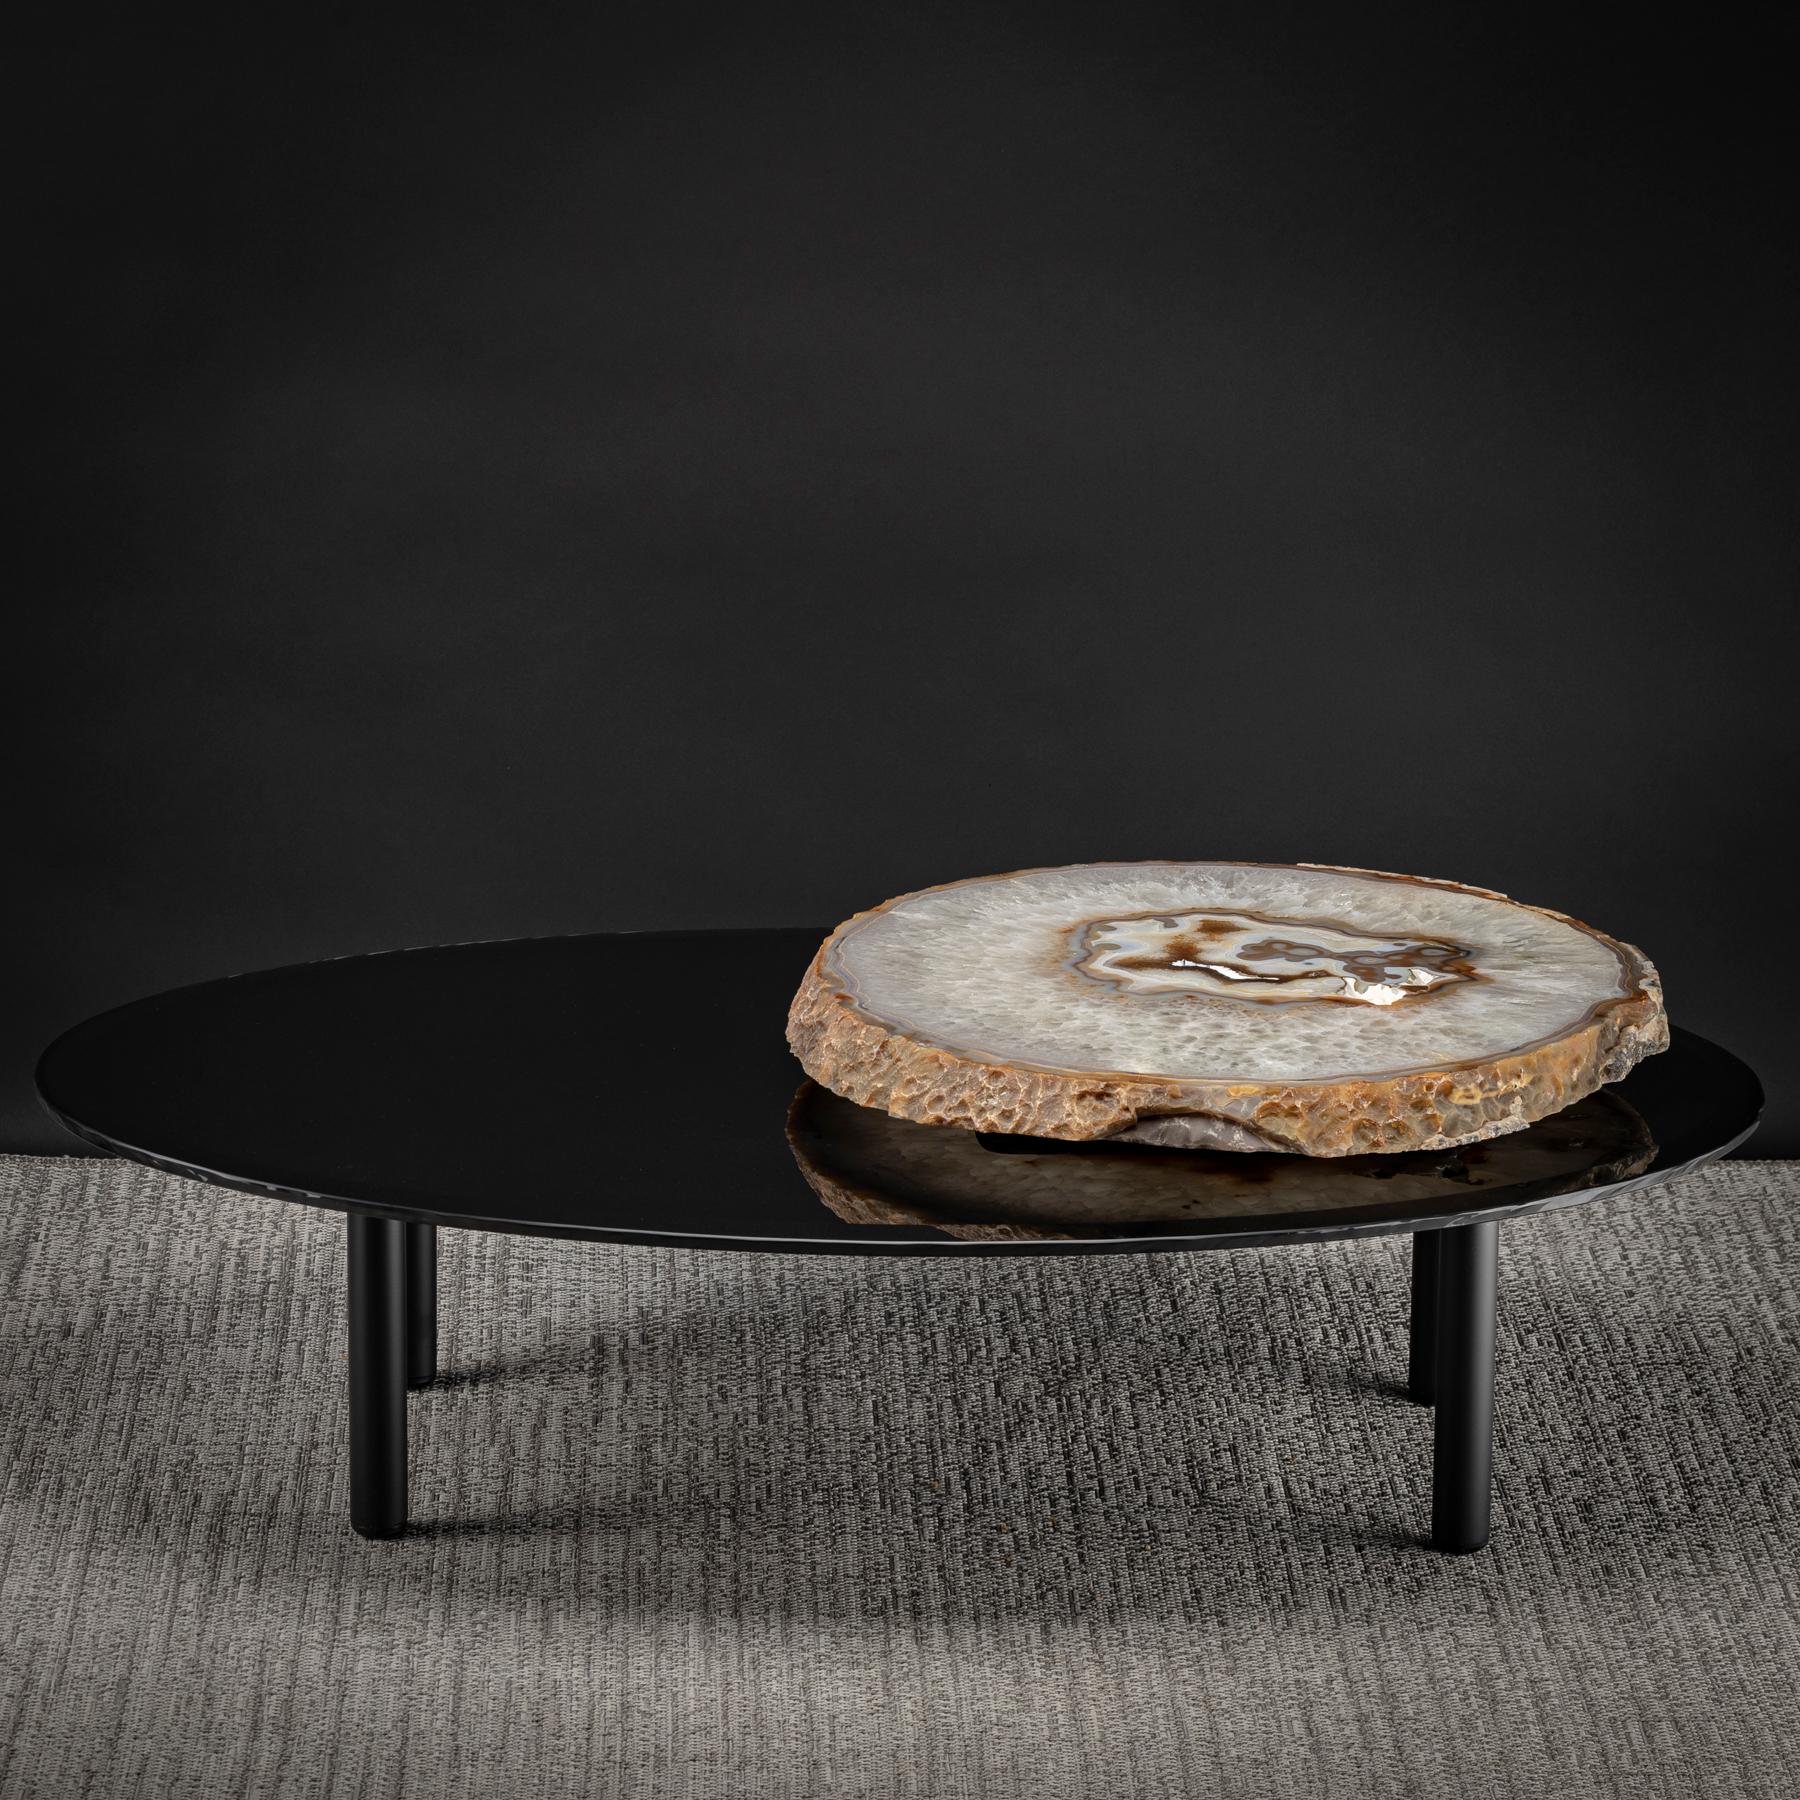 This center table is an original design featuring a one of a kind 